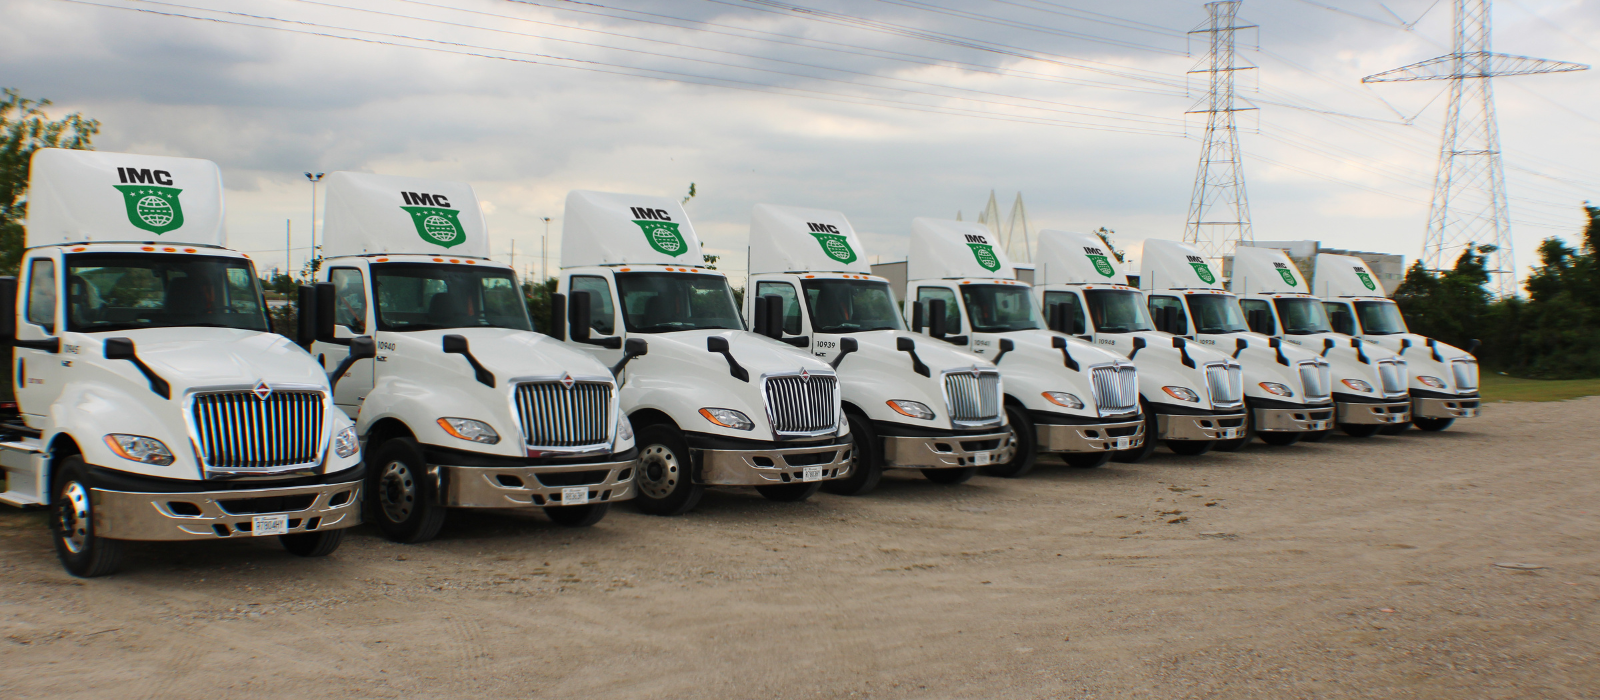 IMC Invests in Fleet Drivers Across the Country